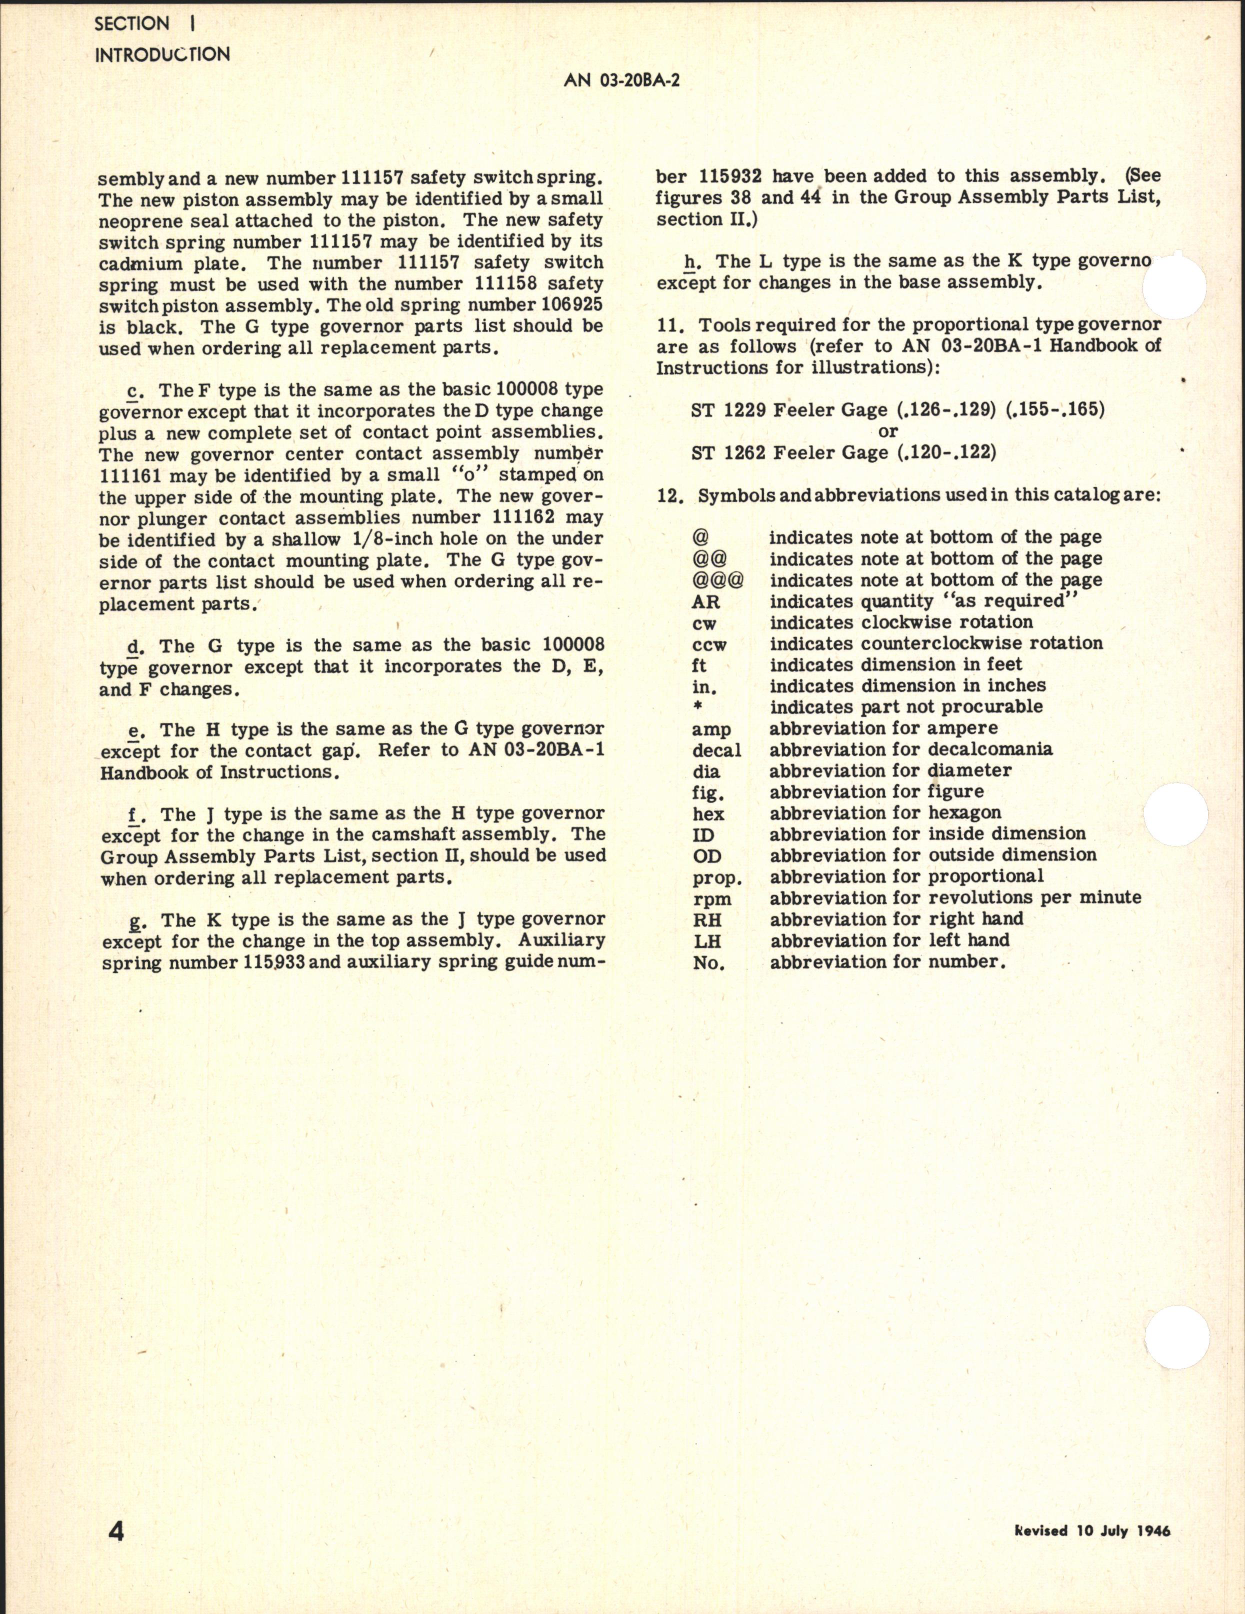 Sample page 6 from AirCorps Library document: Parts Catalog for Electric Propeller Control System